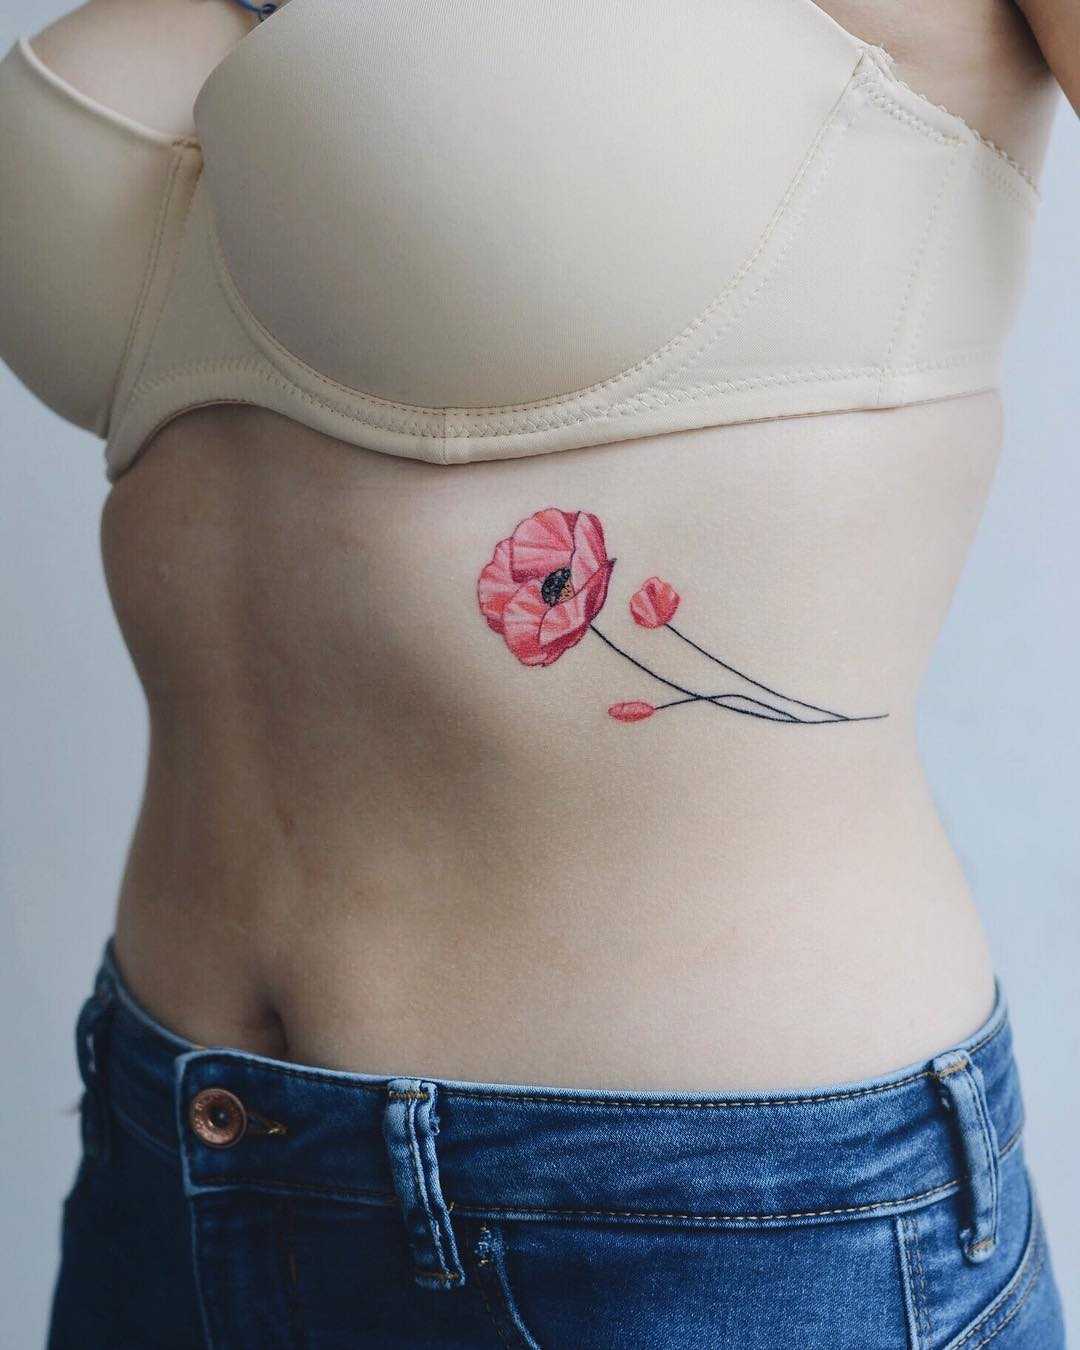 Pink flower tattoo on the rib cage